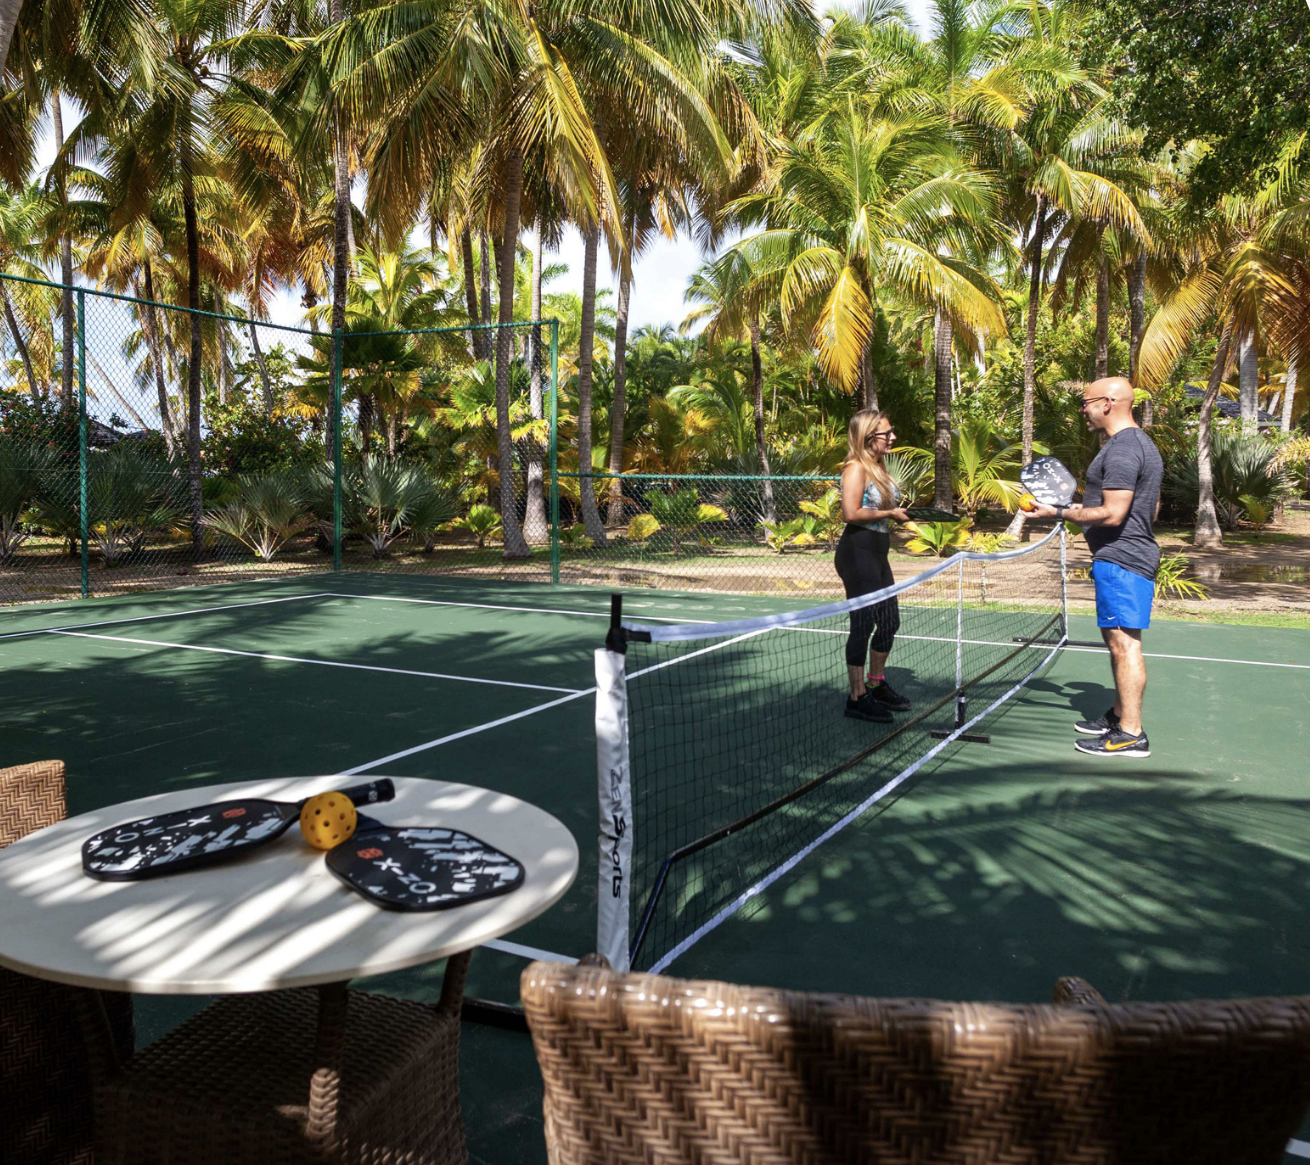 Championship tennis court with tennis pros at Curtain Bluff all-inclusive resort in Antigua